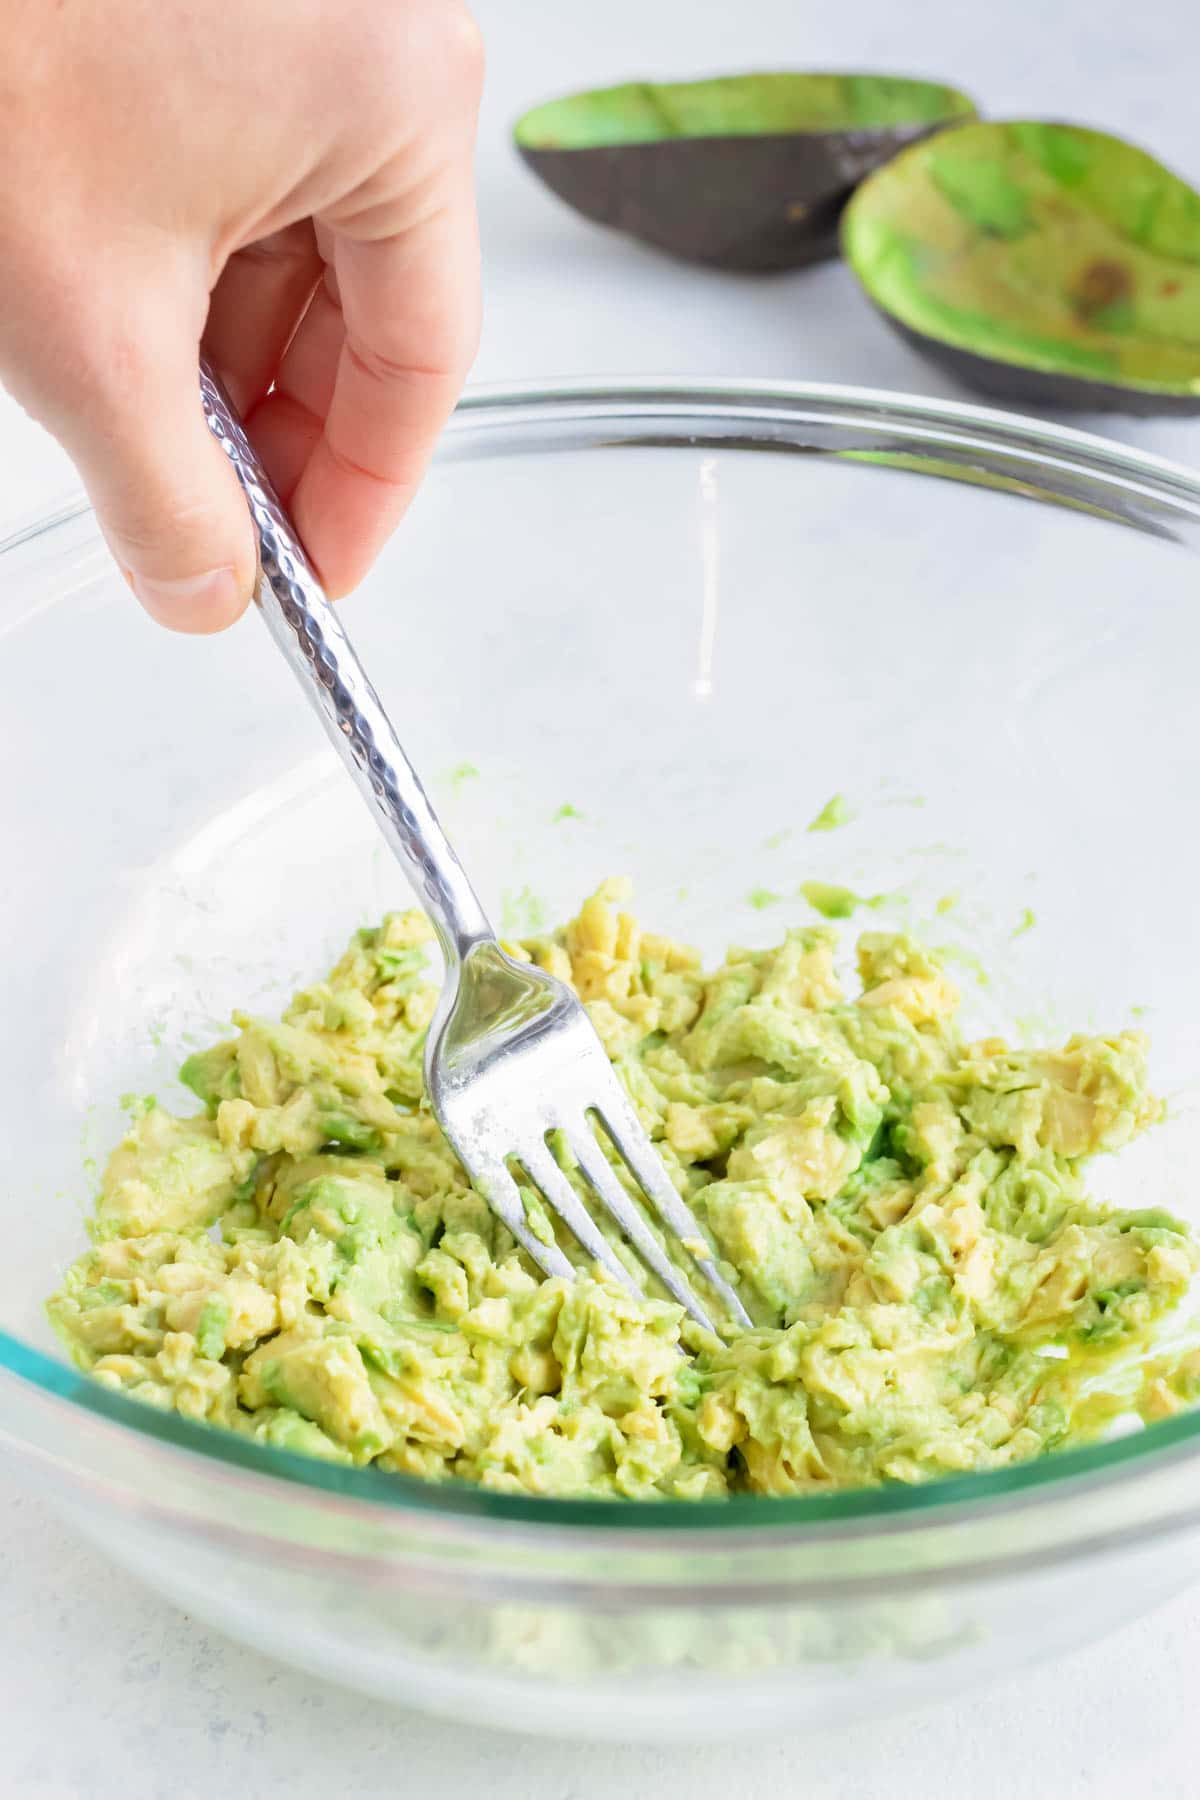 Ripe avocado is smashed by a fork in a glass bowl.